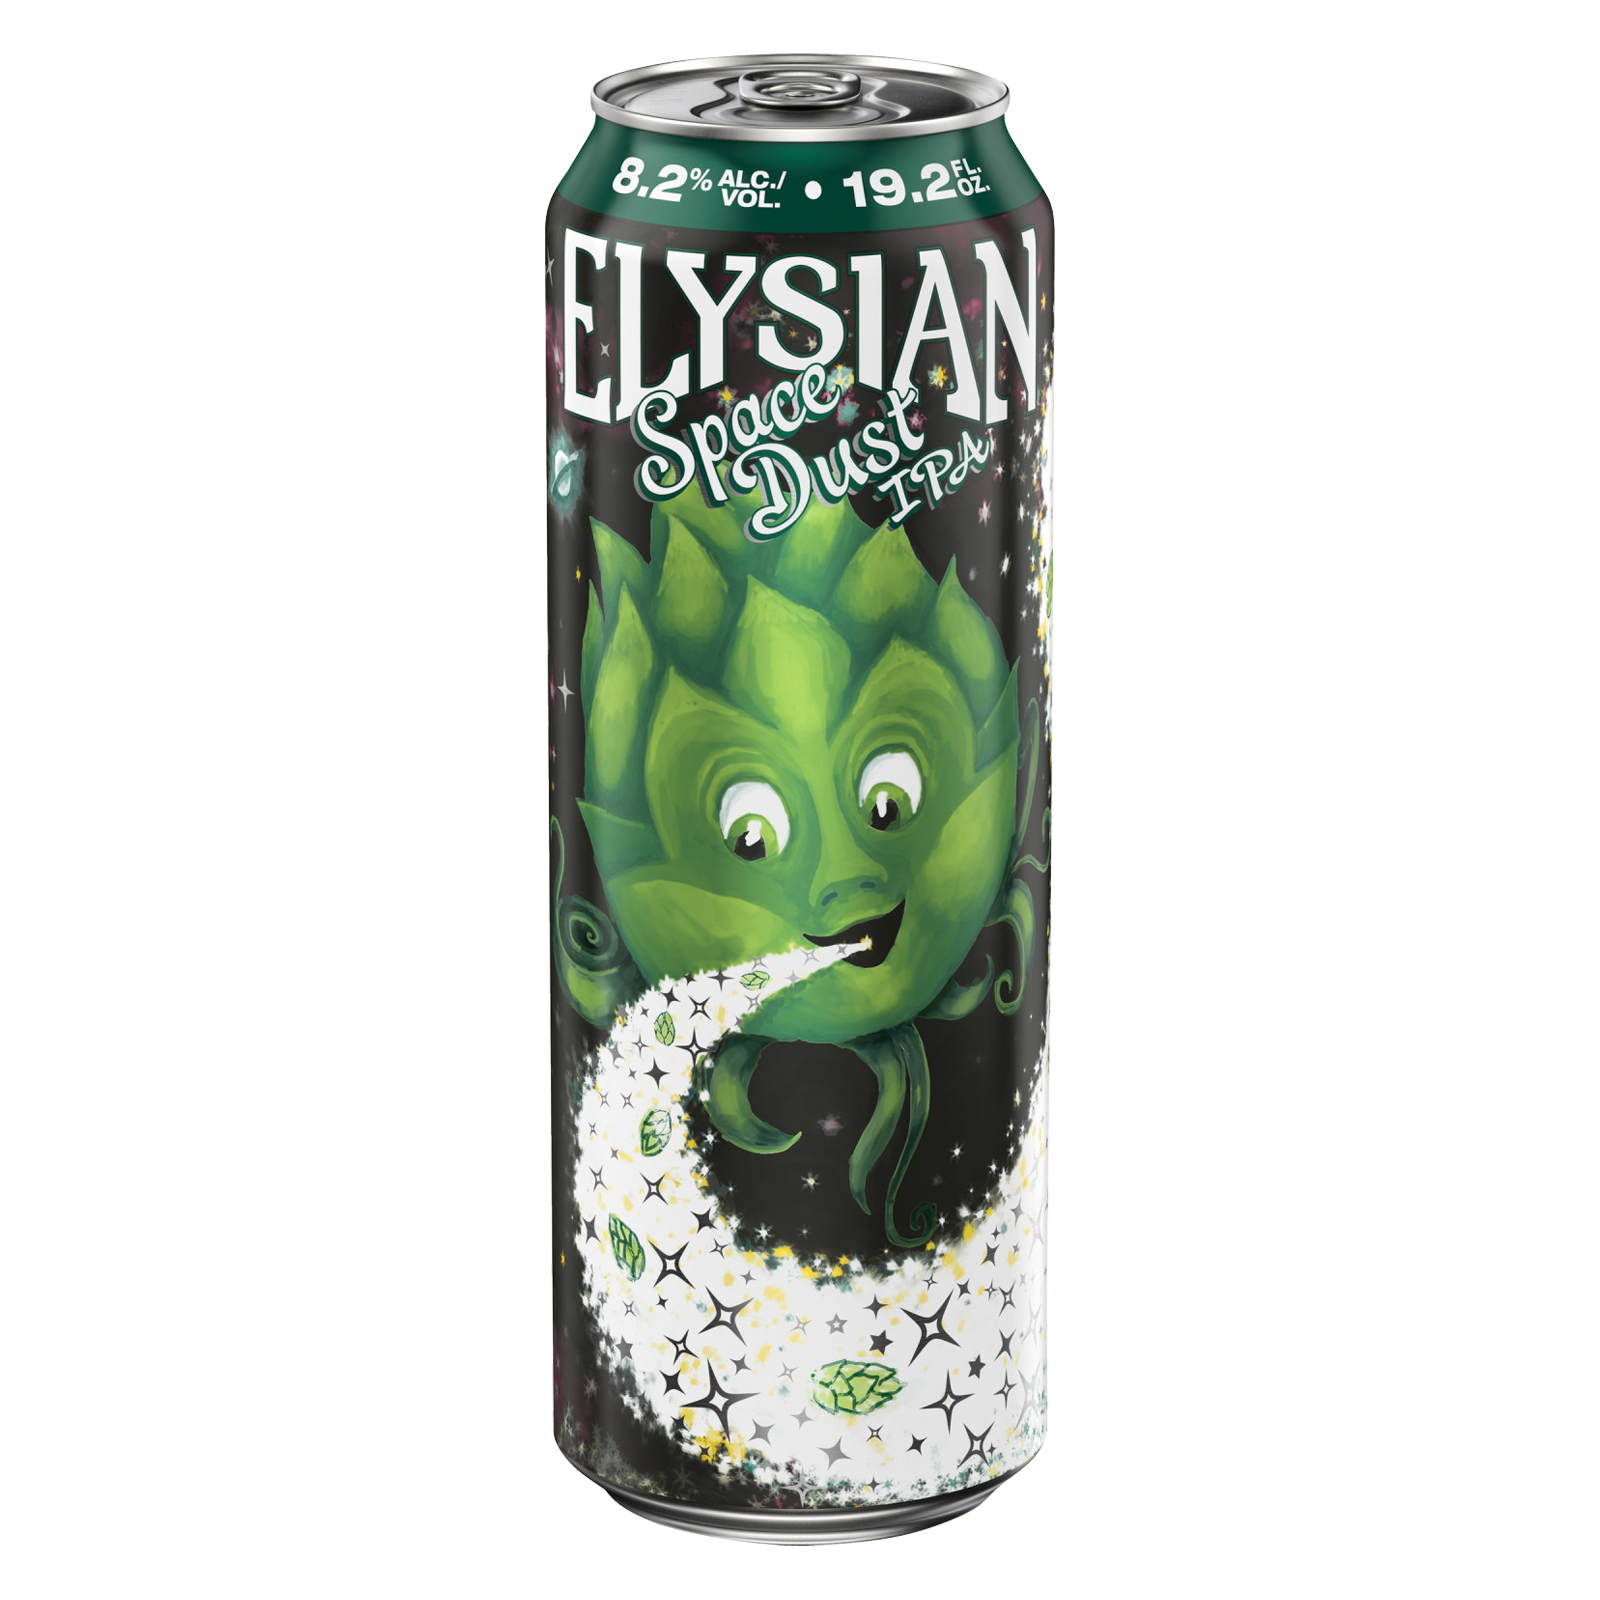 Elysian Brewing Space Dust IPA Single 19.2oz Can 8.2% ABV